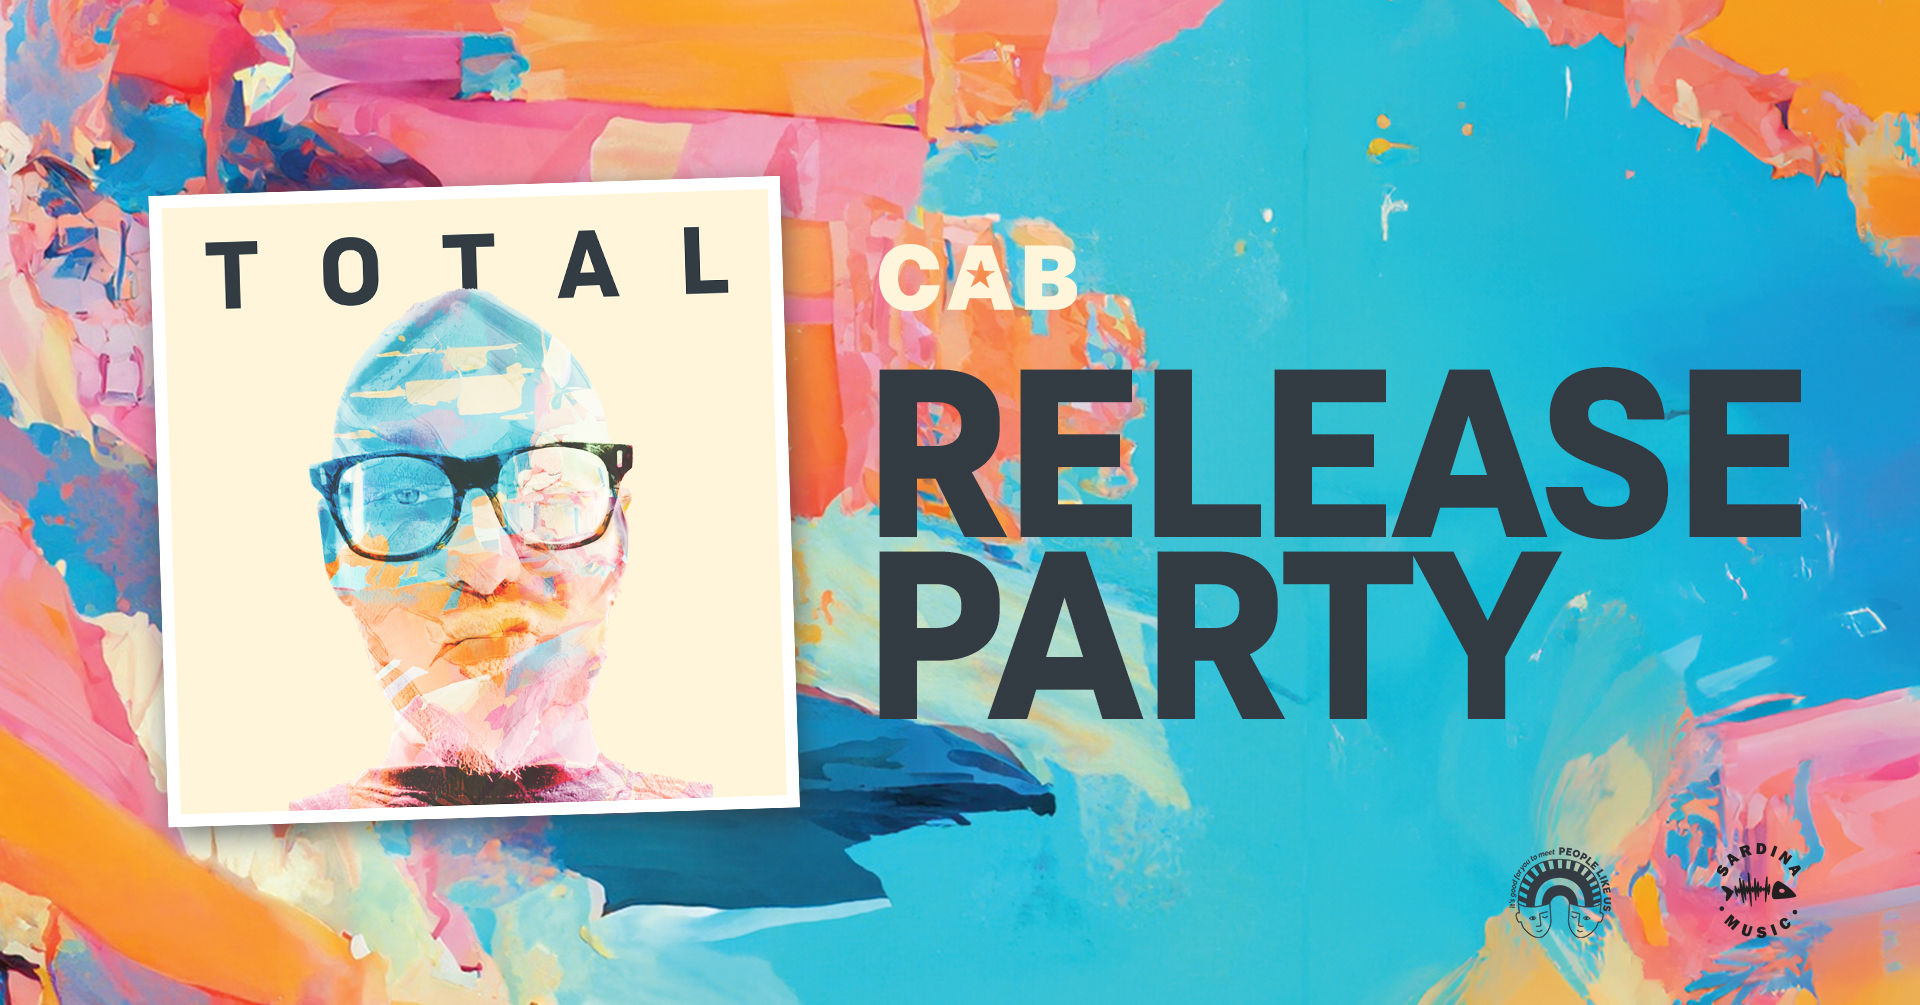 Live: 8/12 ’23 · Releaseparty for Total EP